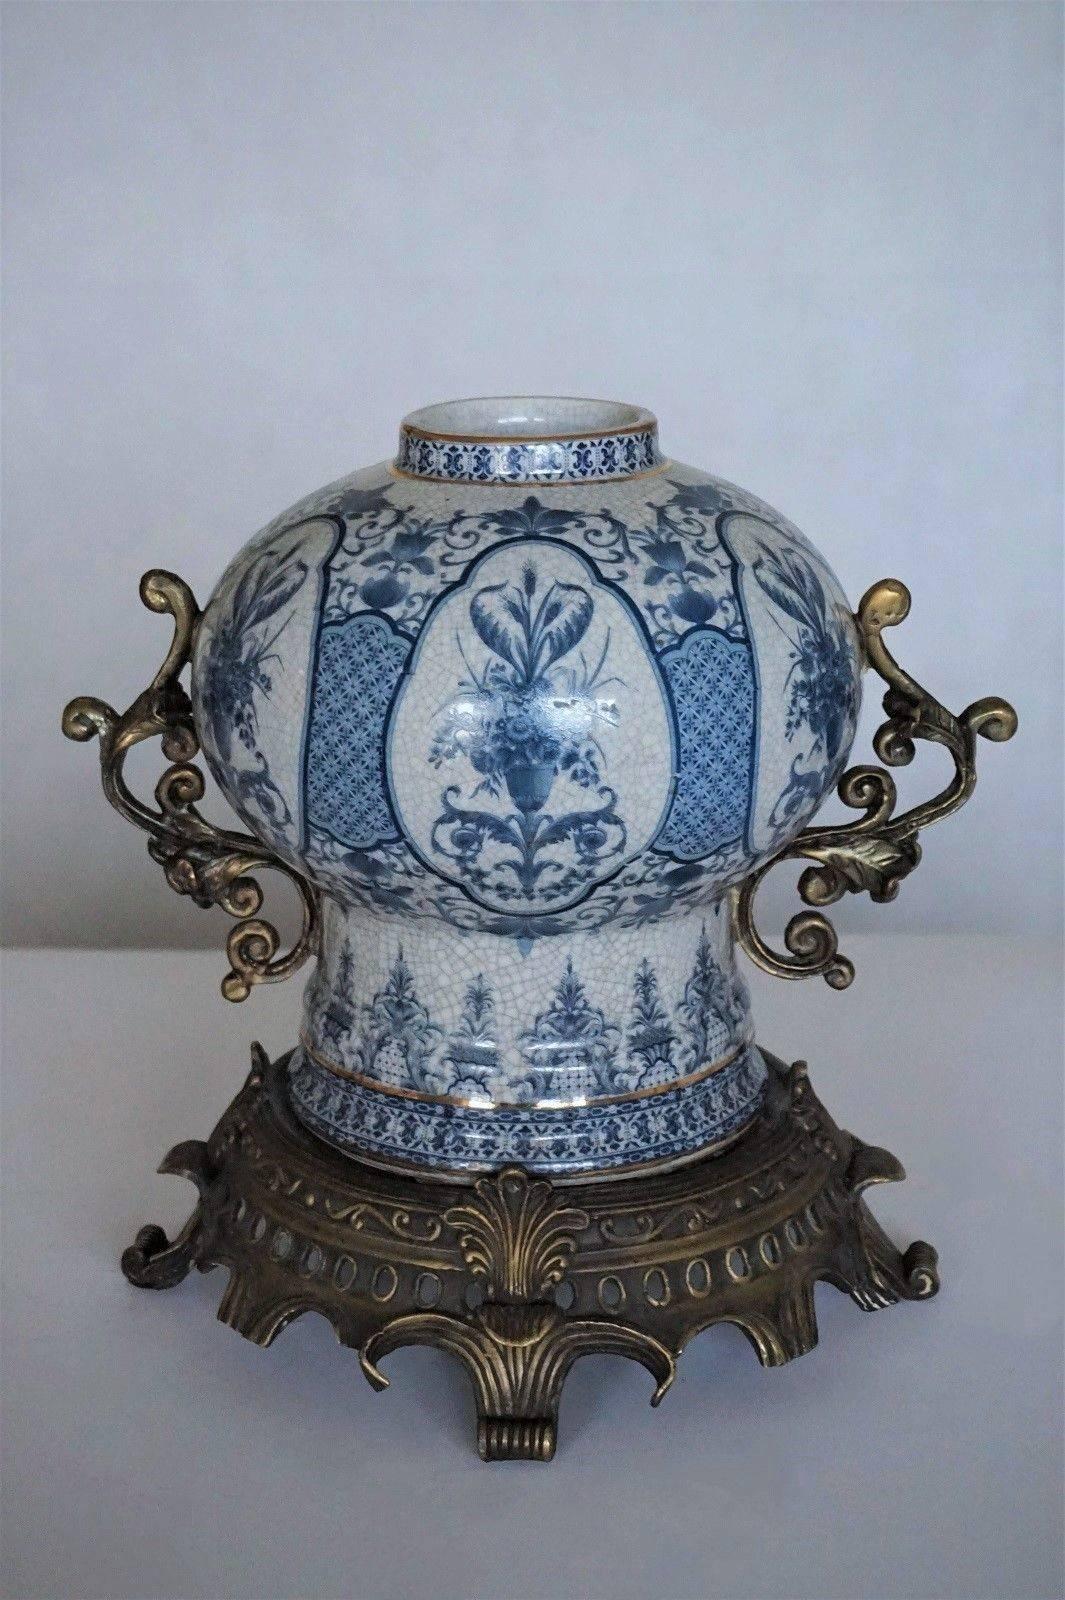 Transfer decorated chinoiserie blue and white porcelain globular jar with bronze handles and stand, late 19th century. White porcelain hand painted in brilliant blue with floral panels and glazed.
Measures:
Height including bronze stand 12 in (30